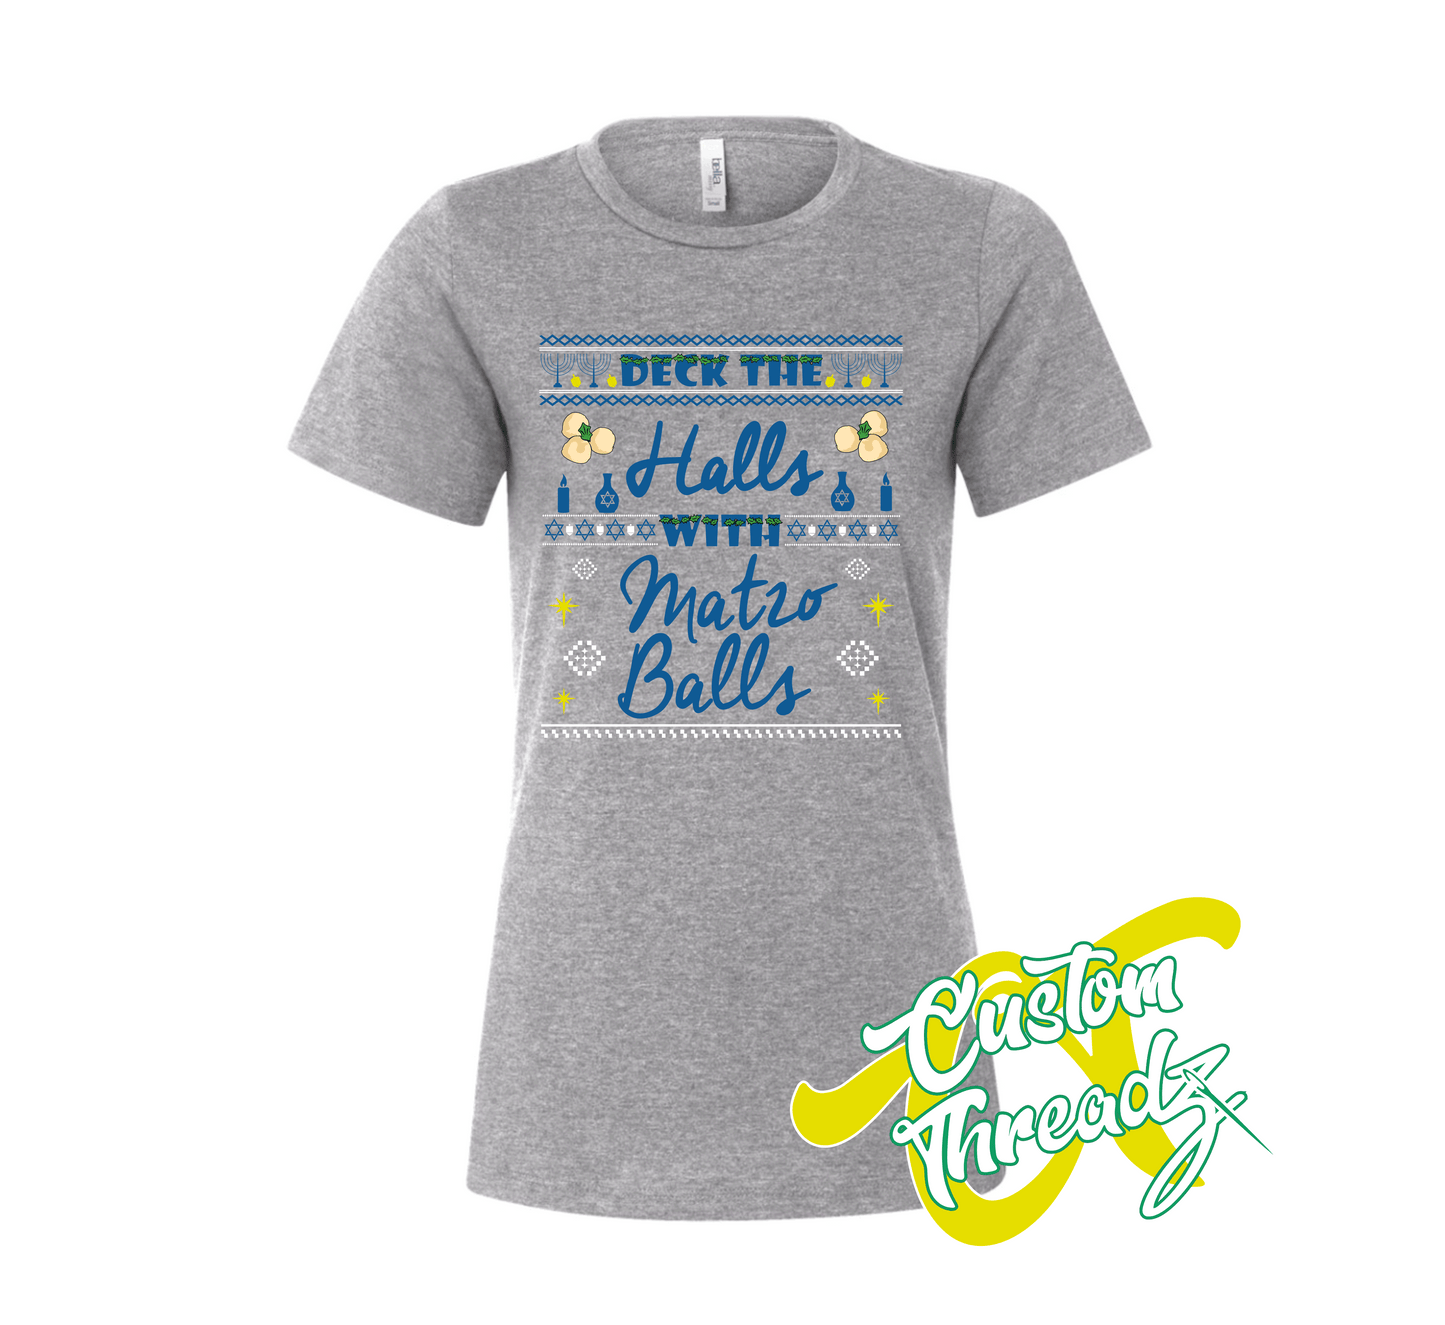 athletic heather grey womens tee with deck the halls with matzo balls hanukkah DTG printed design